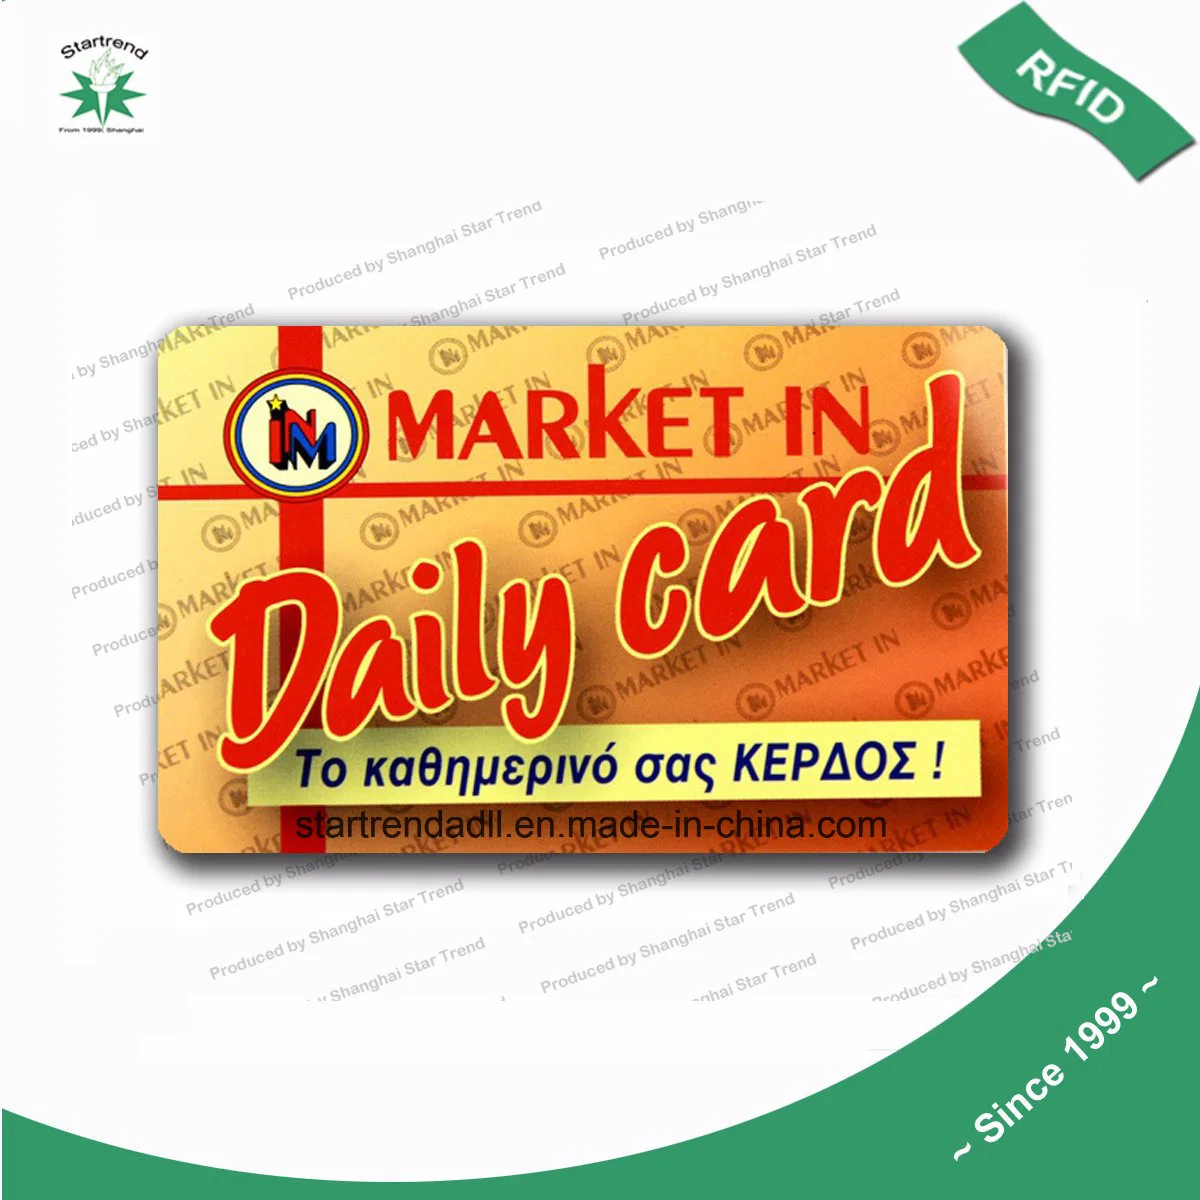 Card - PVC Card/Plastic Card Used as Membership Card/Business Card/Gift Card/Prepaid Card/Loyalty Card/Hotel Key Tag/ATM Card with Magnetic Strip/Hot Stamp/Chip